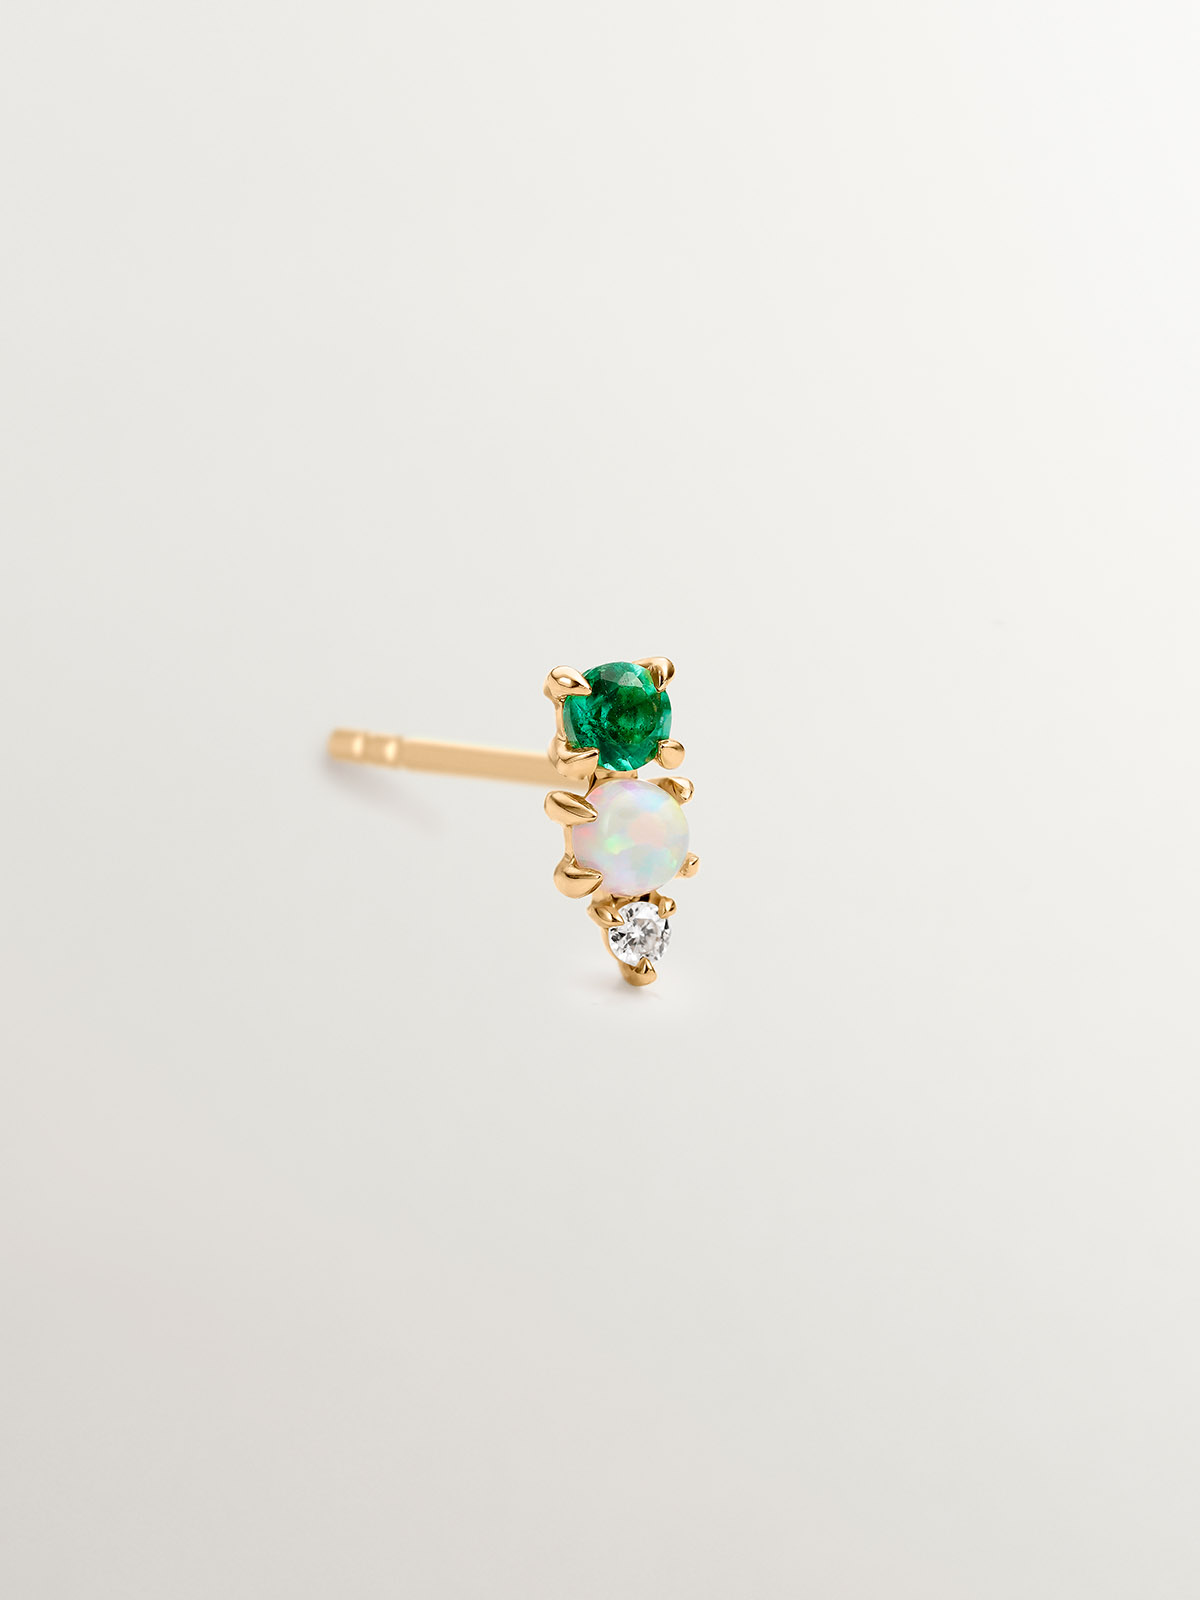 Single 18K yellow gold earring with emerald, lab grown white opal and diamond.